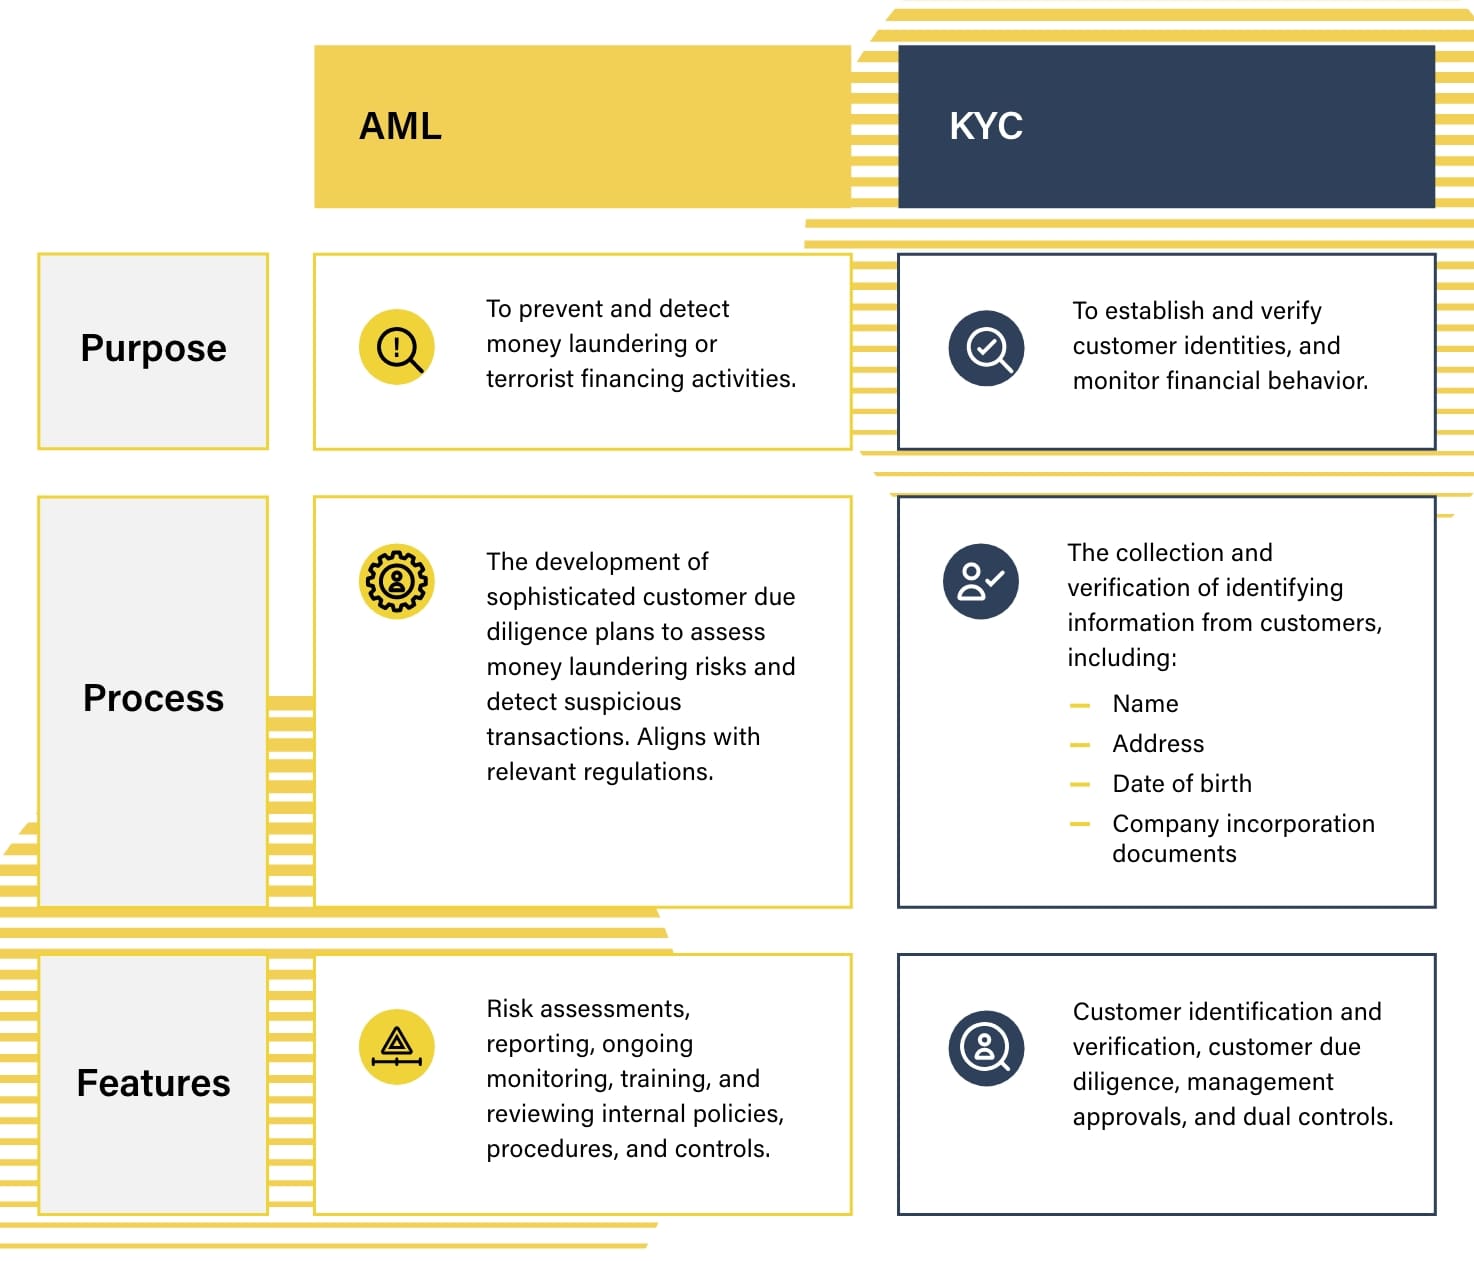 Differences between AML and KYC 